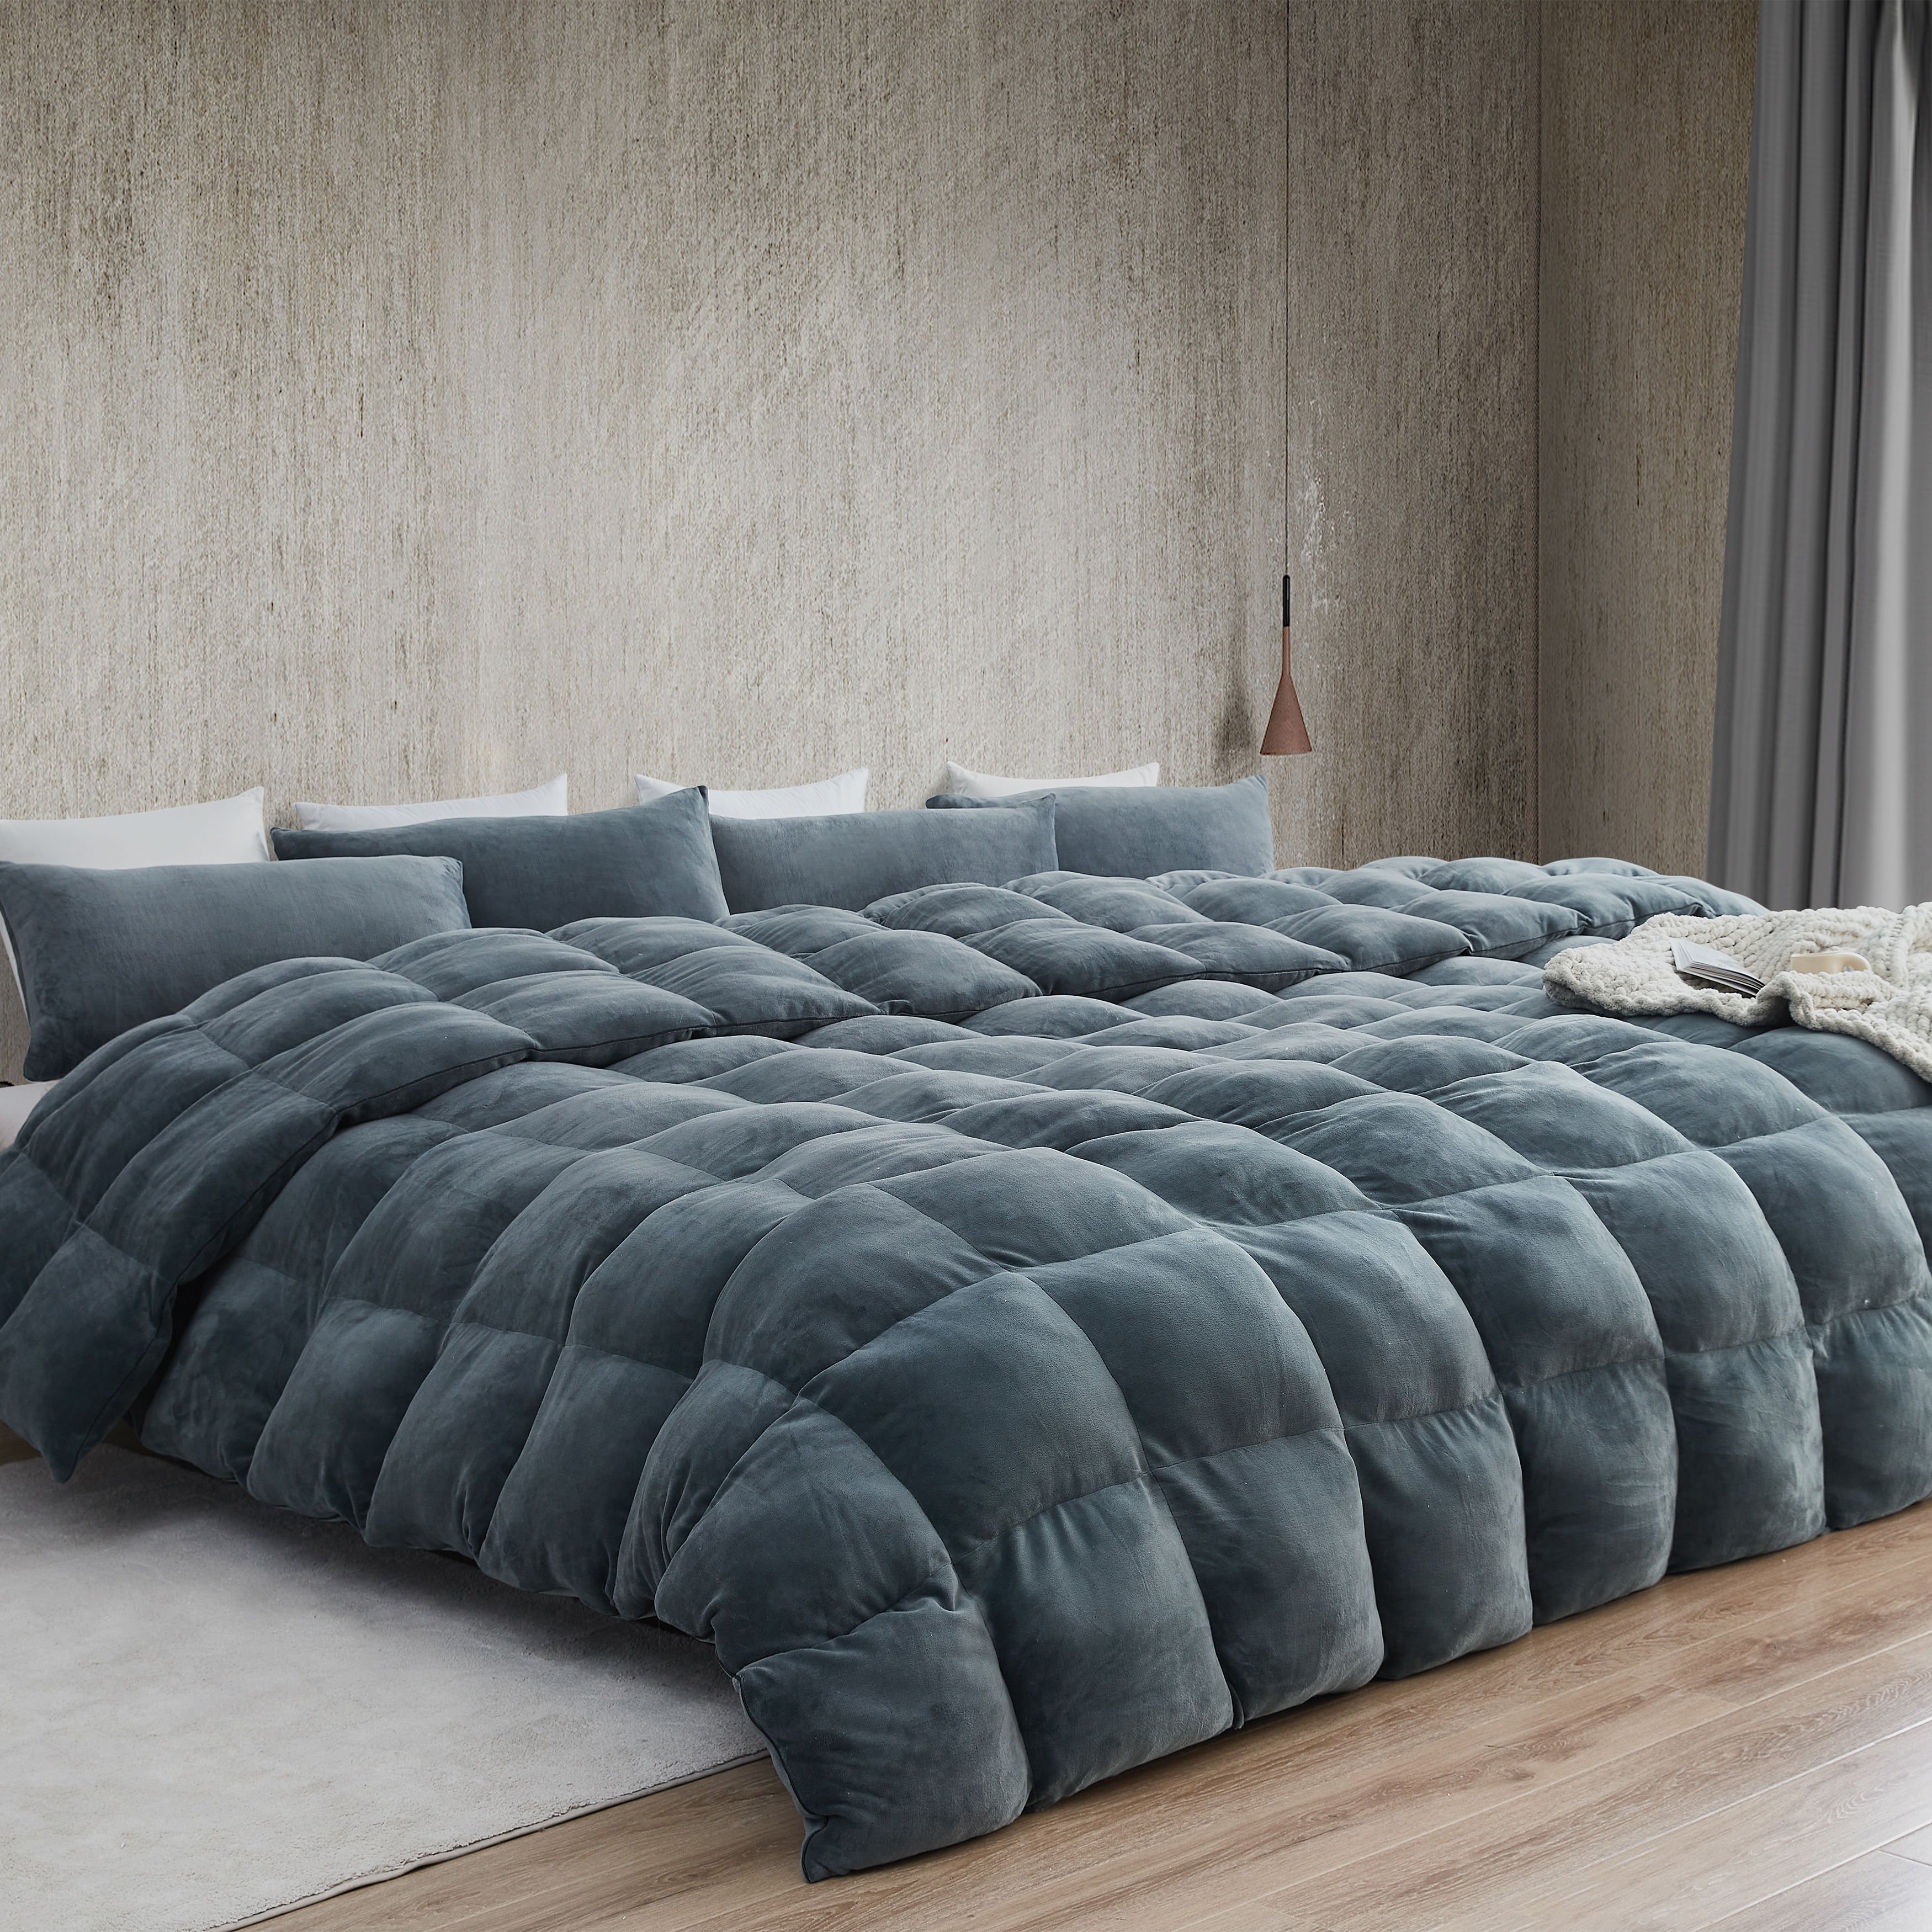 Dam Boi He Thick - Coma Inducer Oversized Comforter - Moss Gray